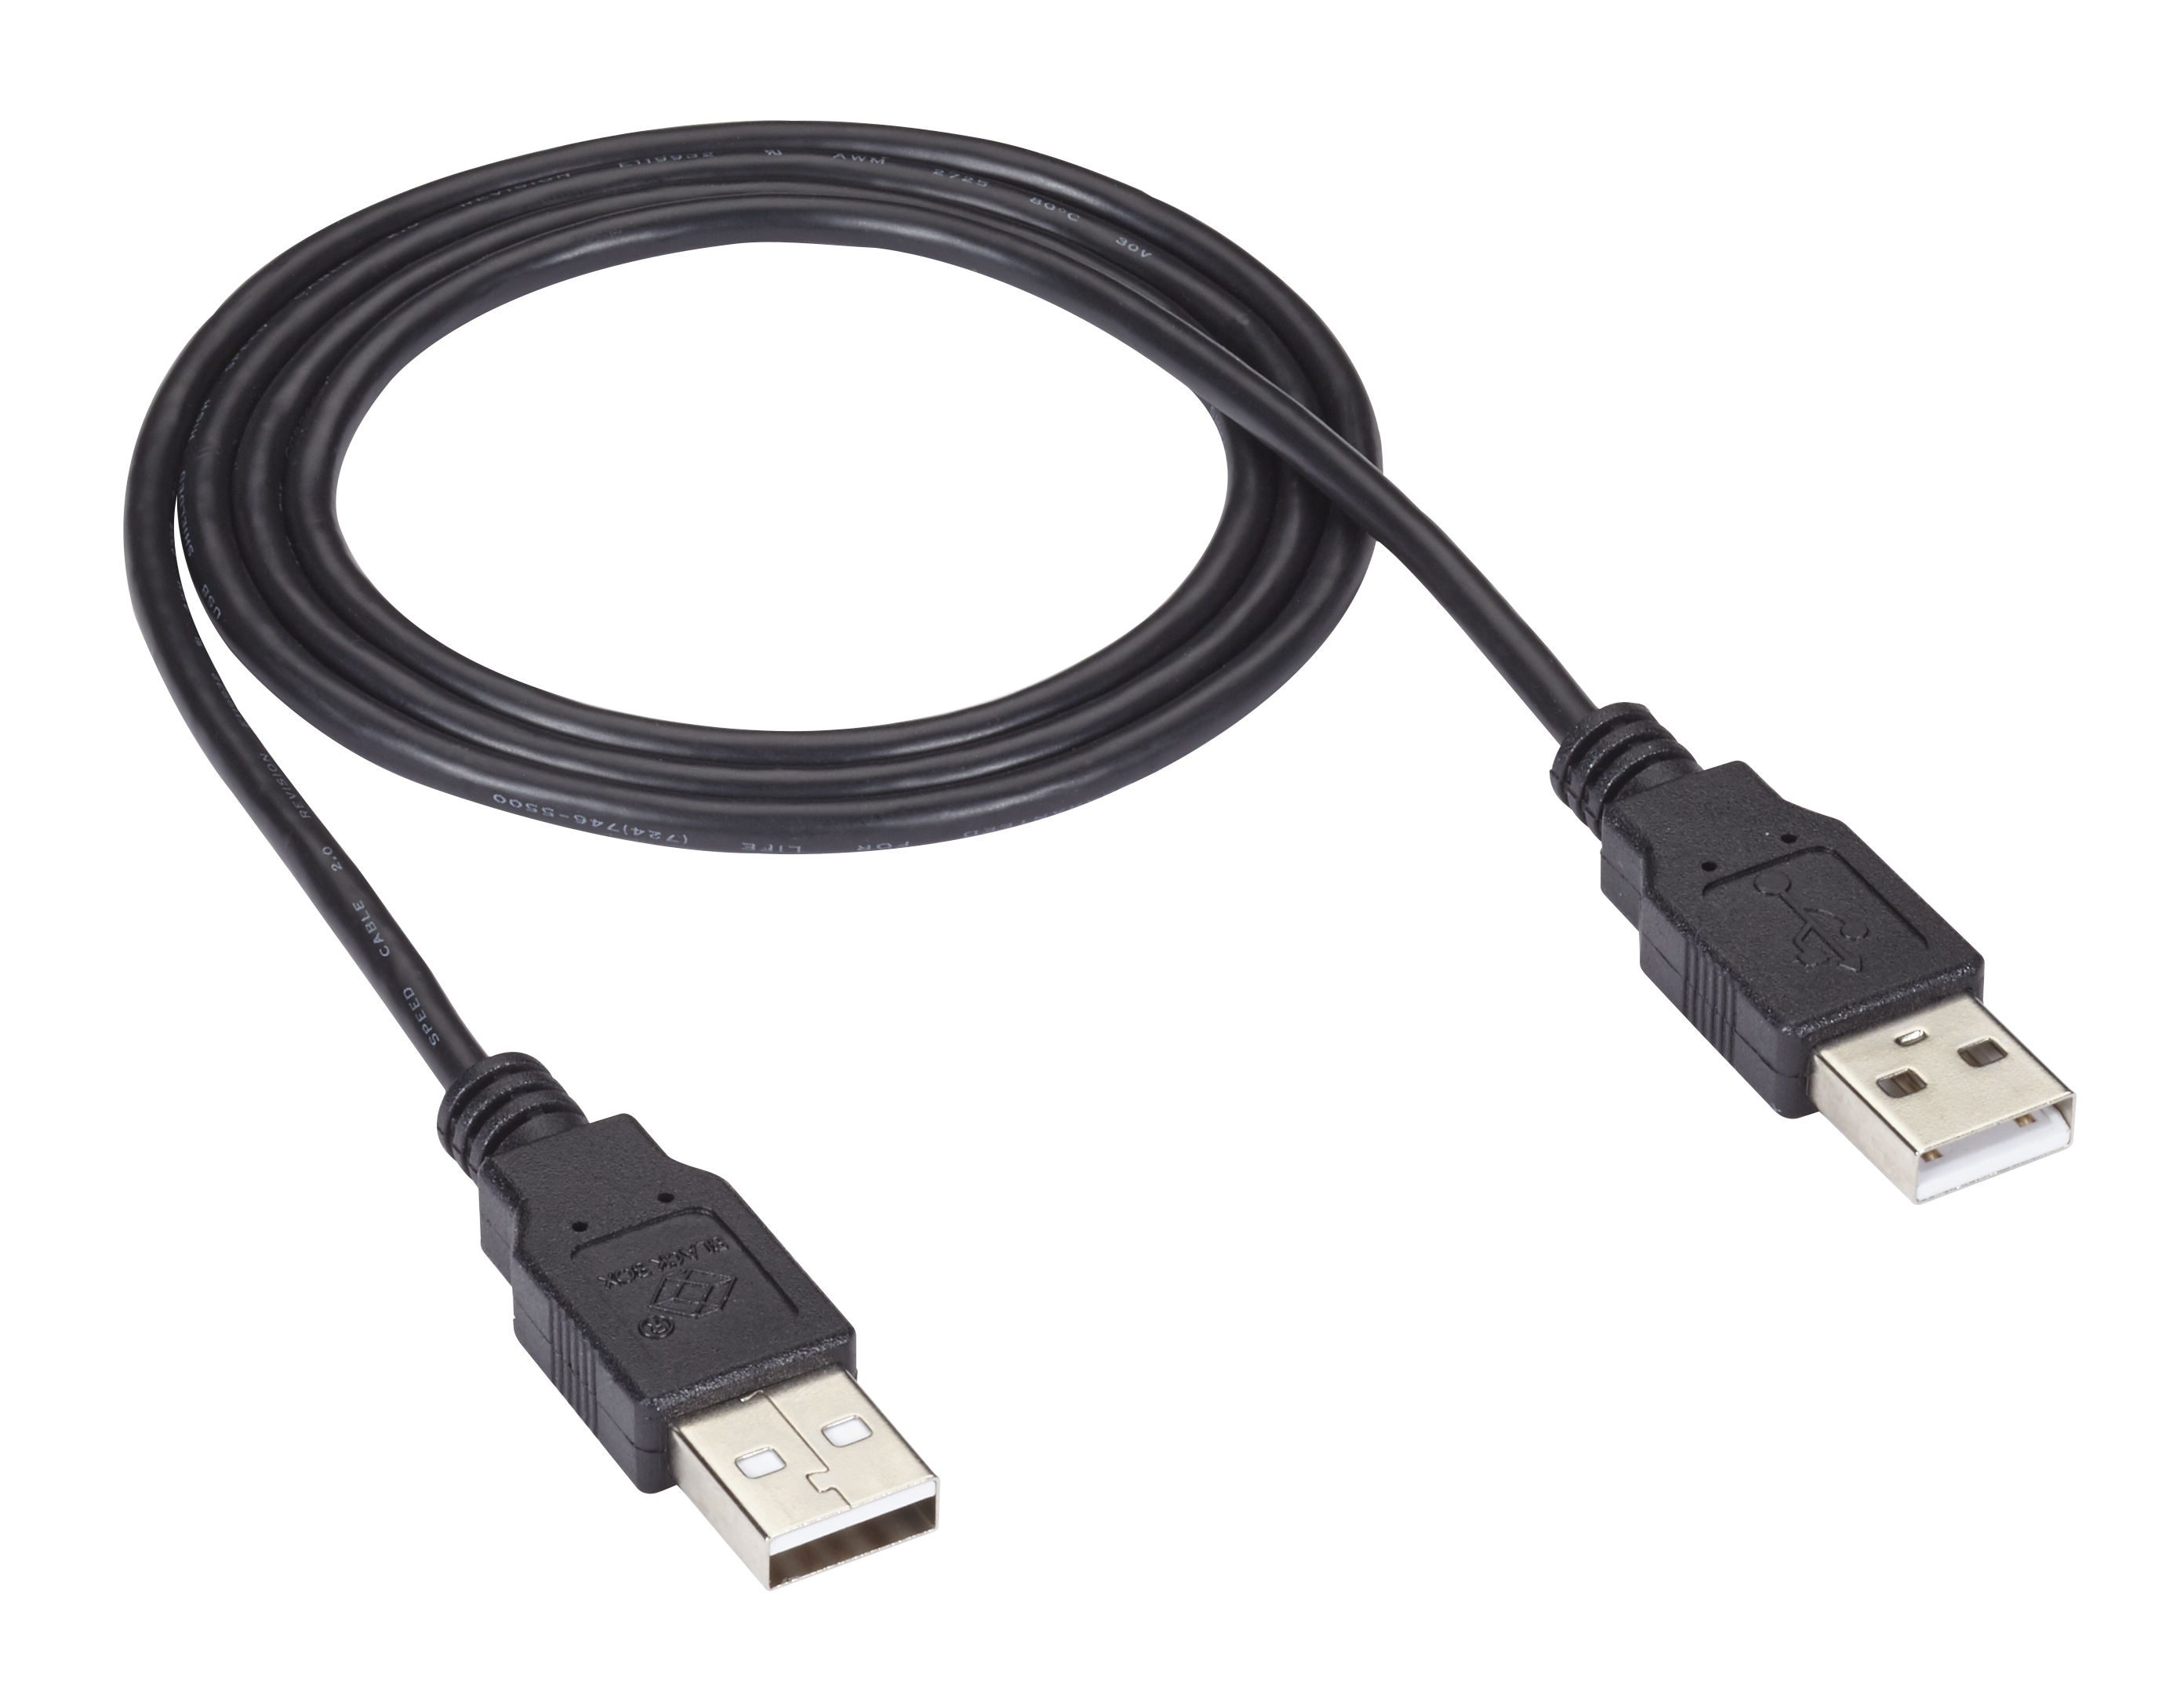 usb cable with 2 male ends